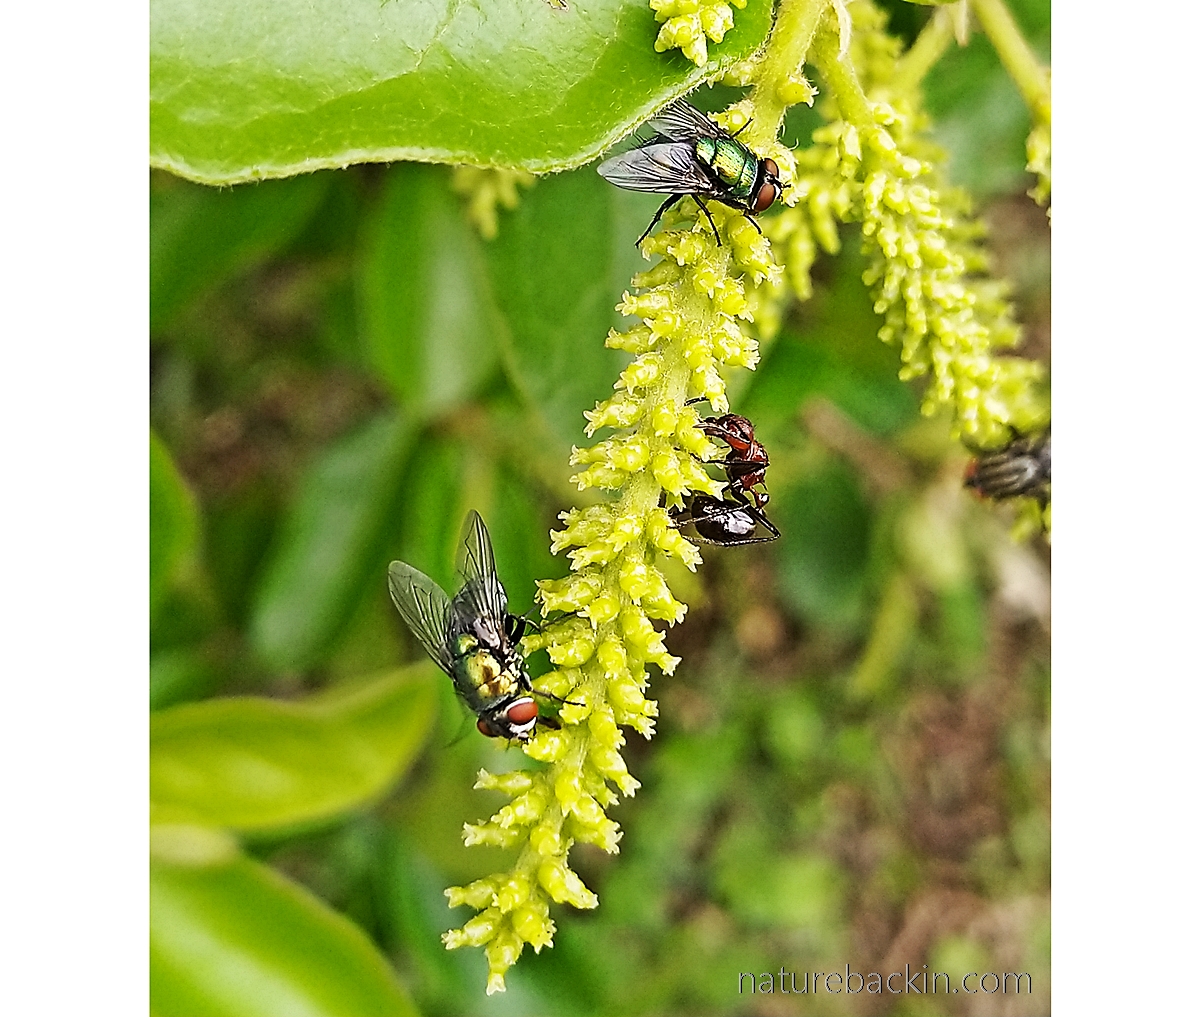 Blow flies and ant feeding on flowers of tassell-berry tree